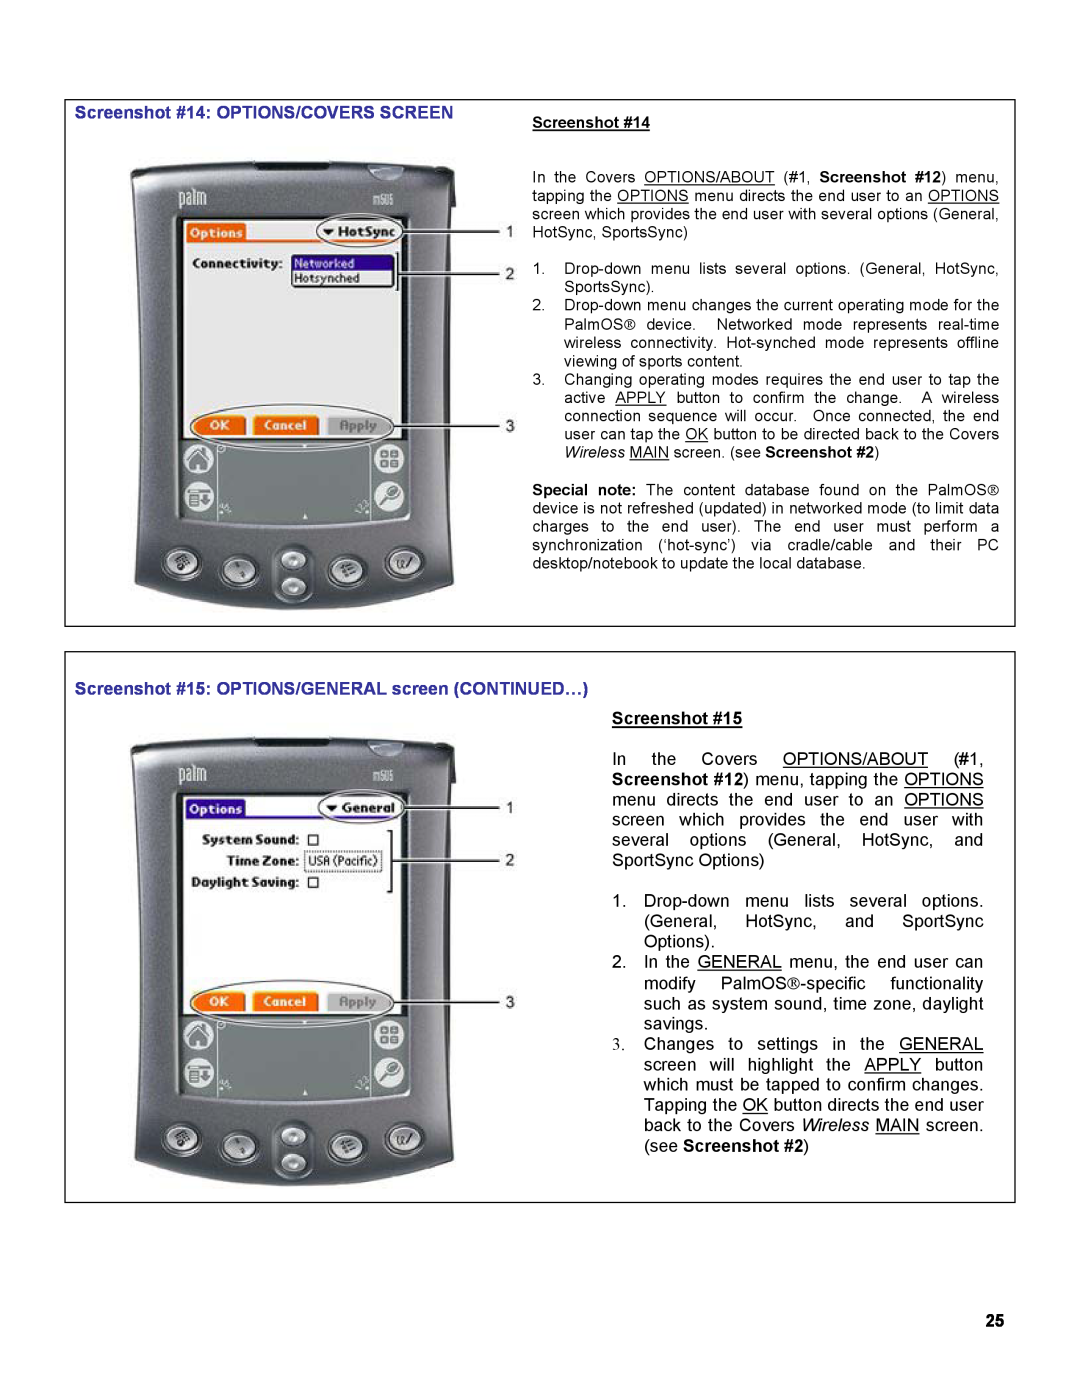 Palm OS Devices manual Screenshot #14 OPTIONS/COVERS SCREEN, Screenshot #15 OPTIONS/GENERAL screen CONTINUED… 